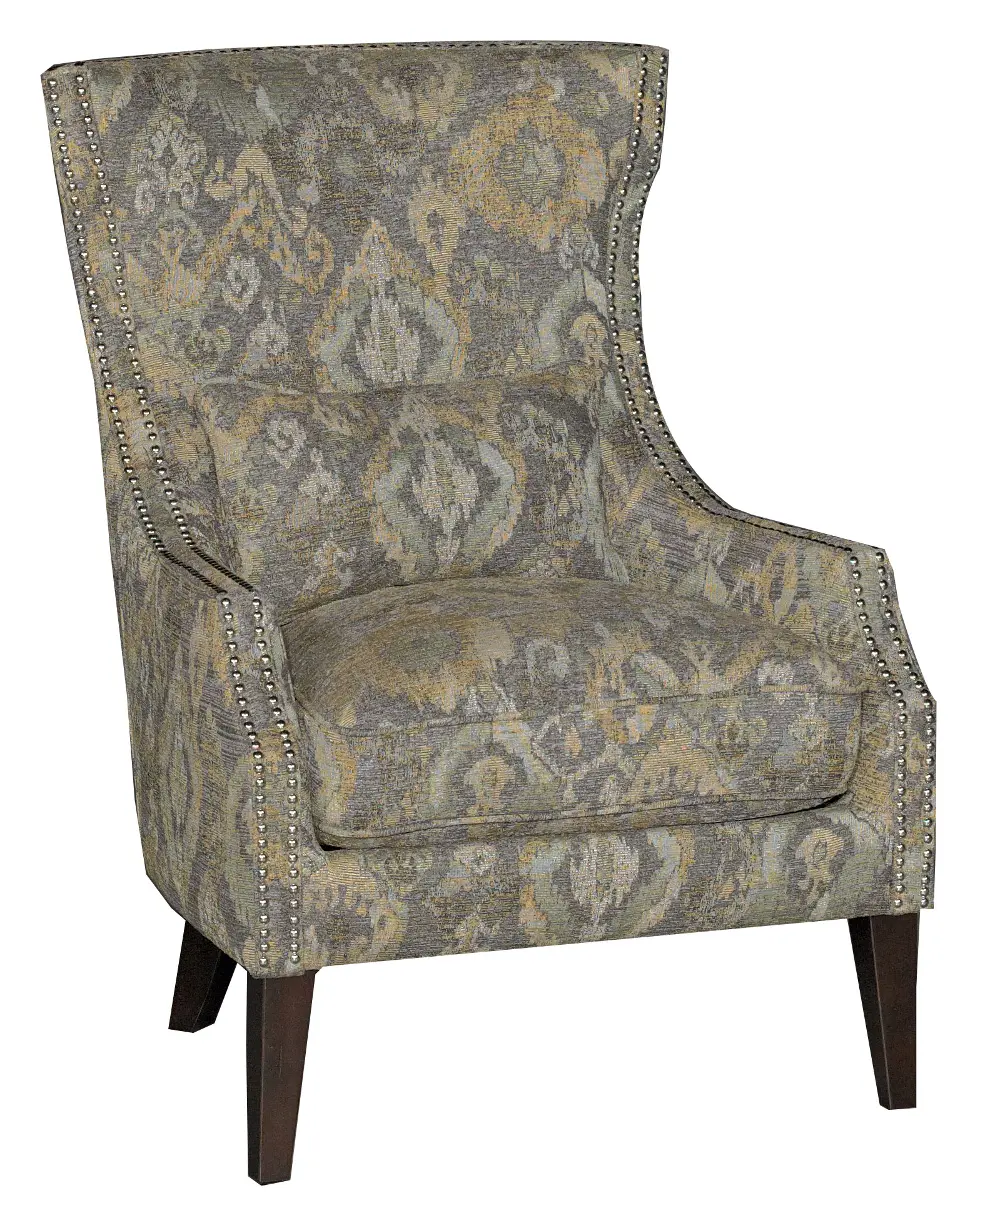 Ikat Stone Classic Traditional Wing Chair - Crafton -1